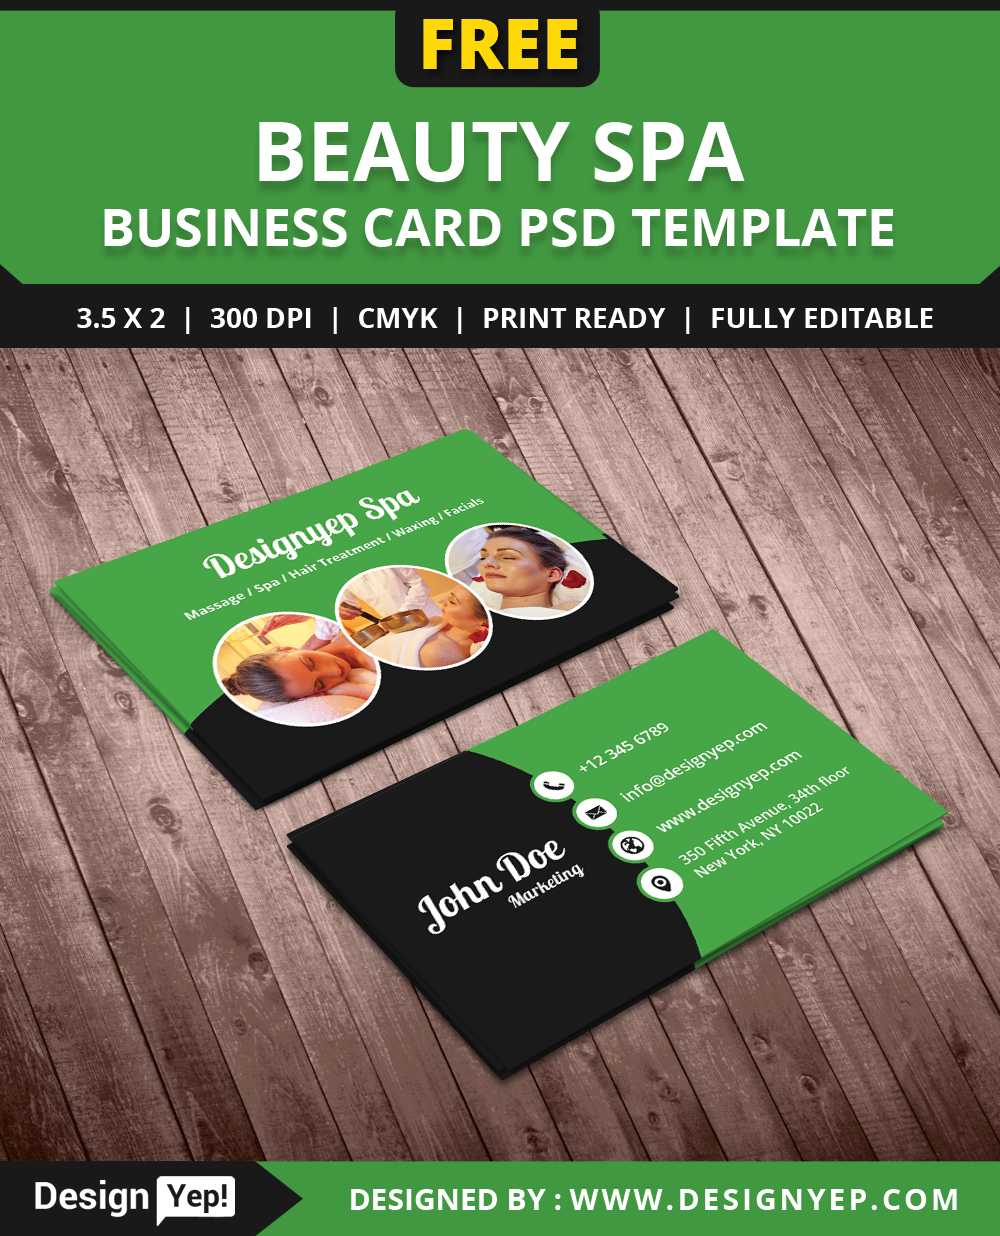 Free Beauty Spa Business Card Psd Template – Designyep Throughout Massage Therapy Business Card Templates